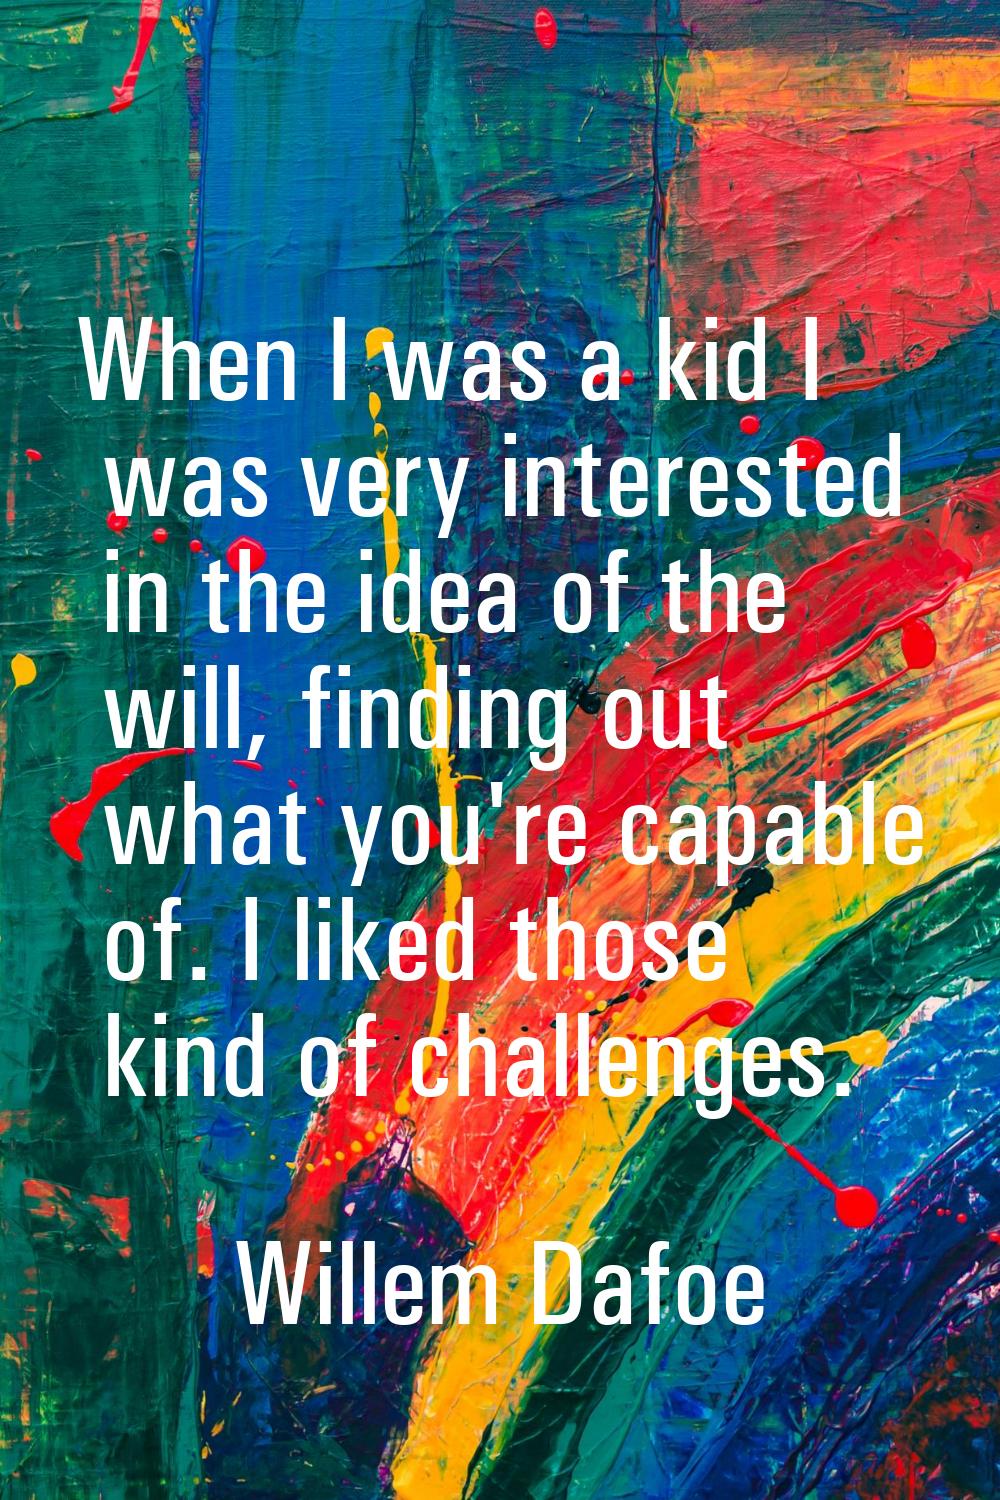 When I was a kid I was very interested in the idea of the will, finding out what you're capable of.